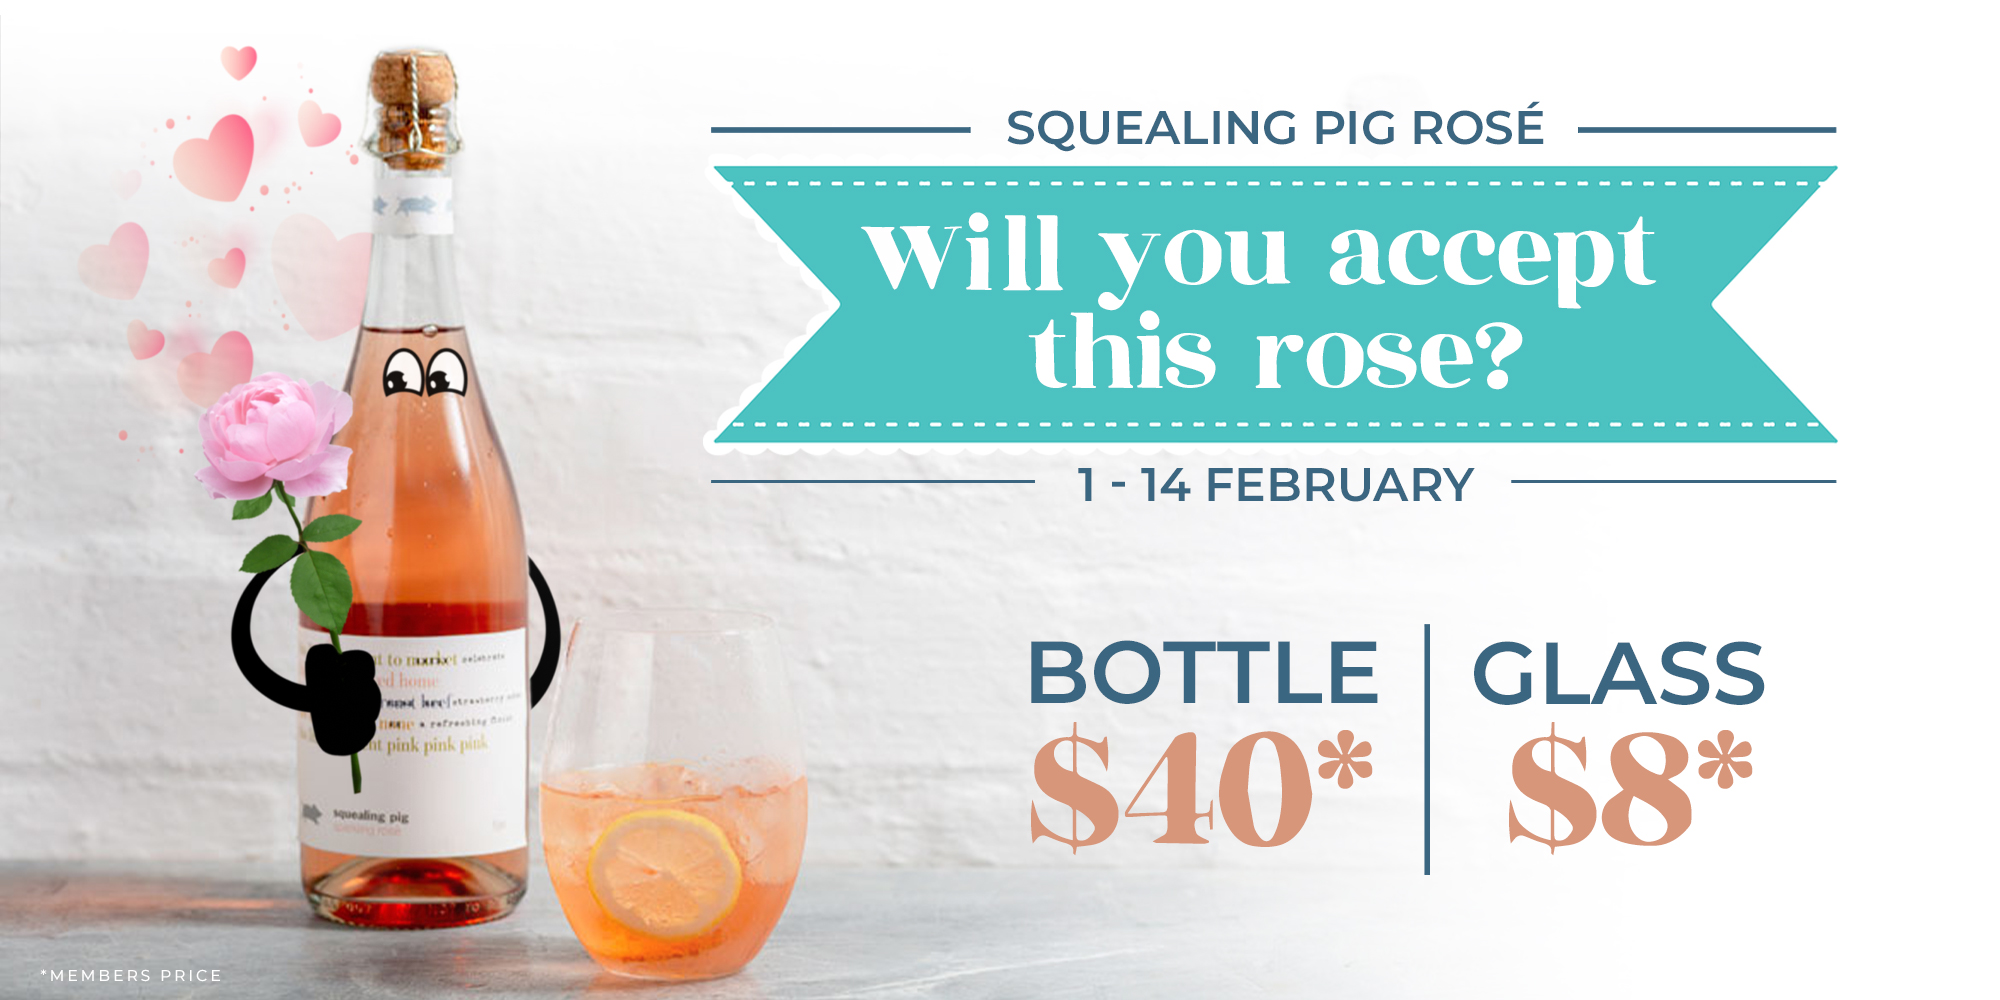 Members Beverage Promotion. Squealing Pig Rose. $40 Bottle. $8 glass.